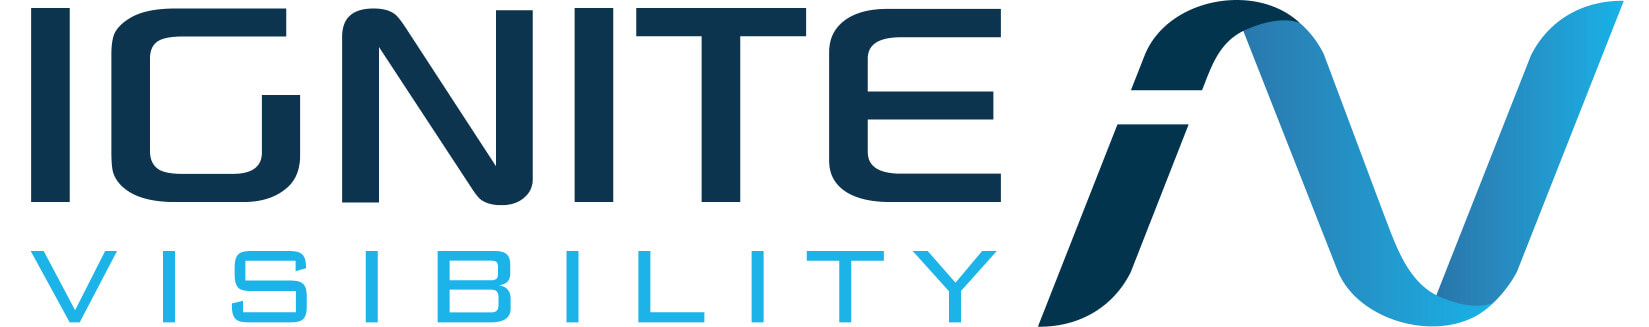 Top Local Online Marketing Firm Logo: Ignite Visibility